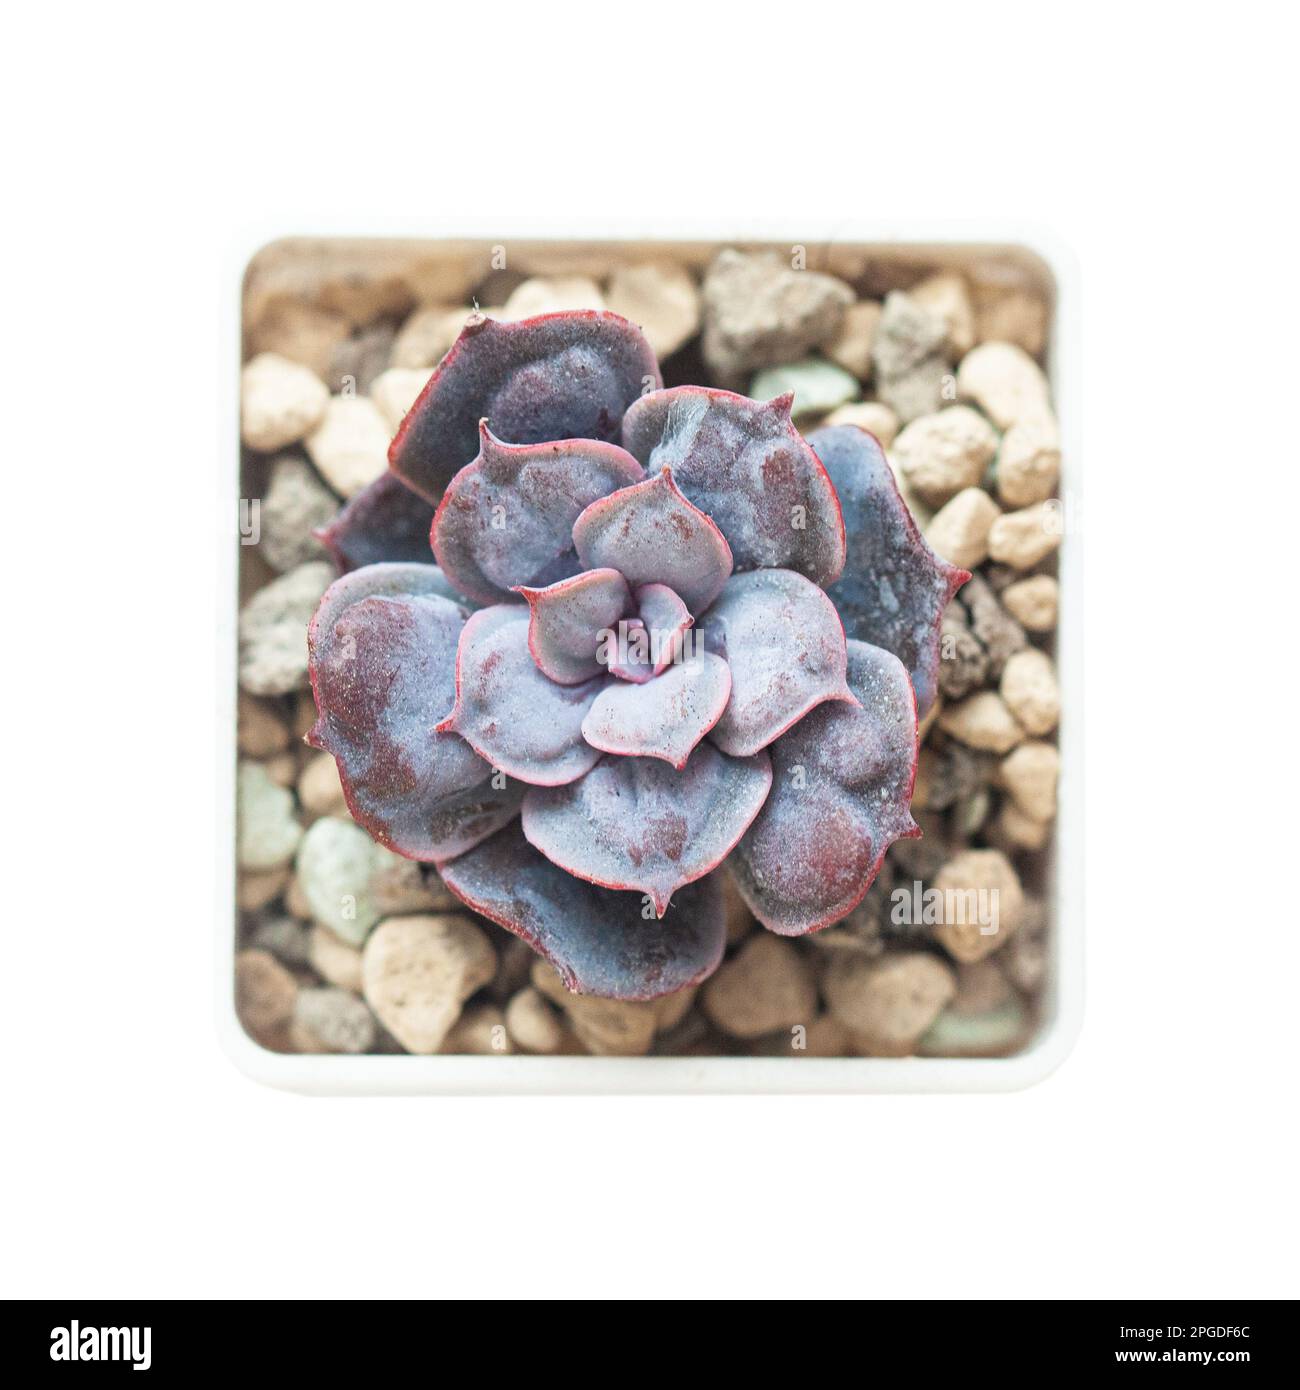 Succulent flowers with shaped bumps on purple leaves. Echeveria Heart's Delight, top view Stock Photo